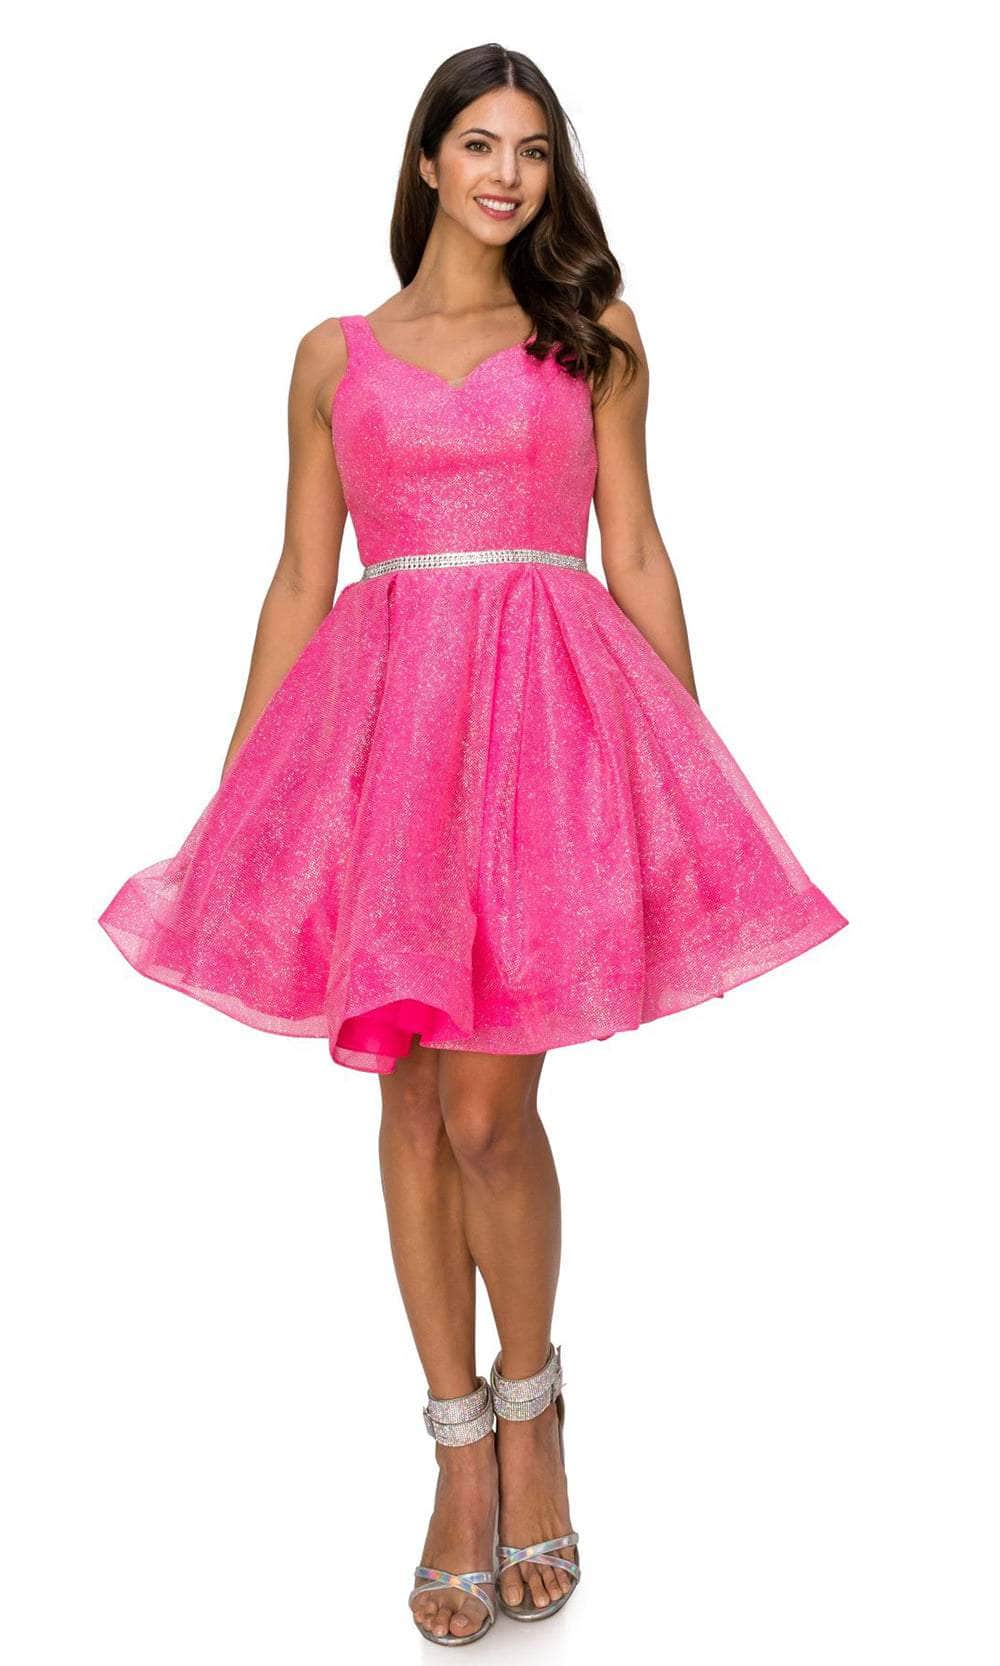 Cinderella Couture 8047J - V-Neck Glitter Mesh Cocktail Dress Special Occasion Dress XS / Hot Pink